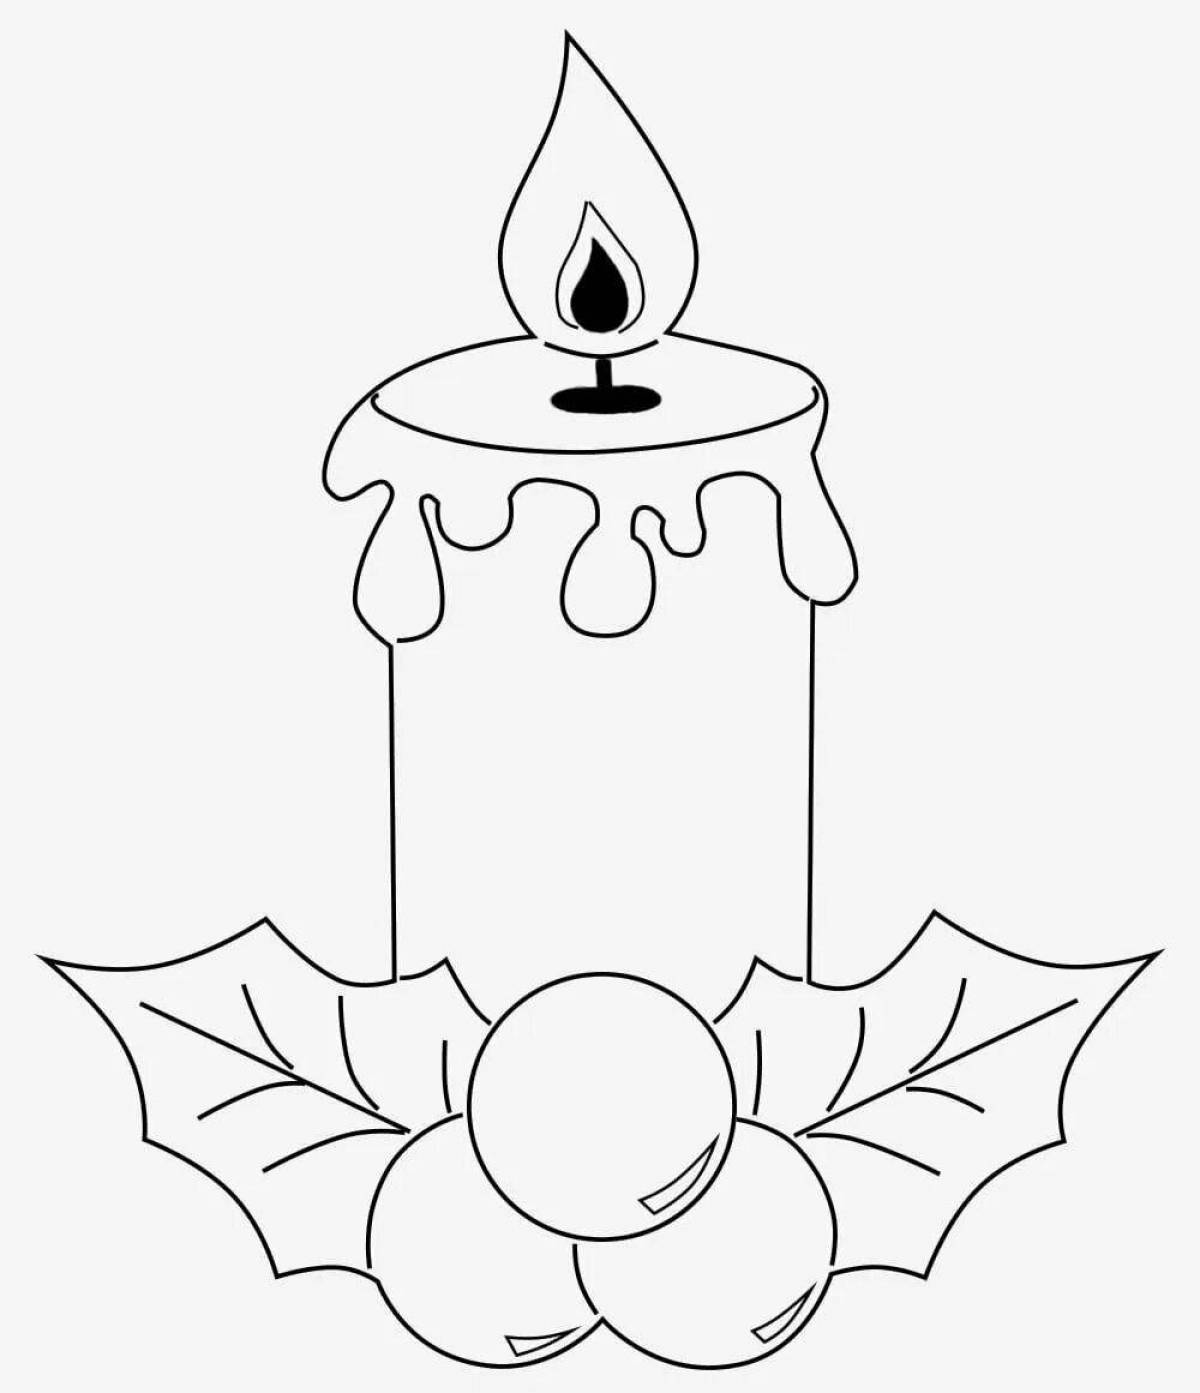 Fancy Christmas candle coloring page